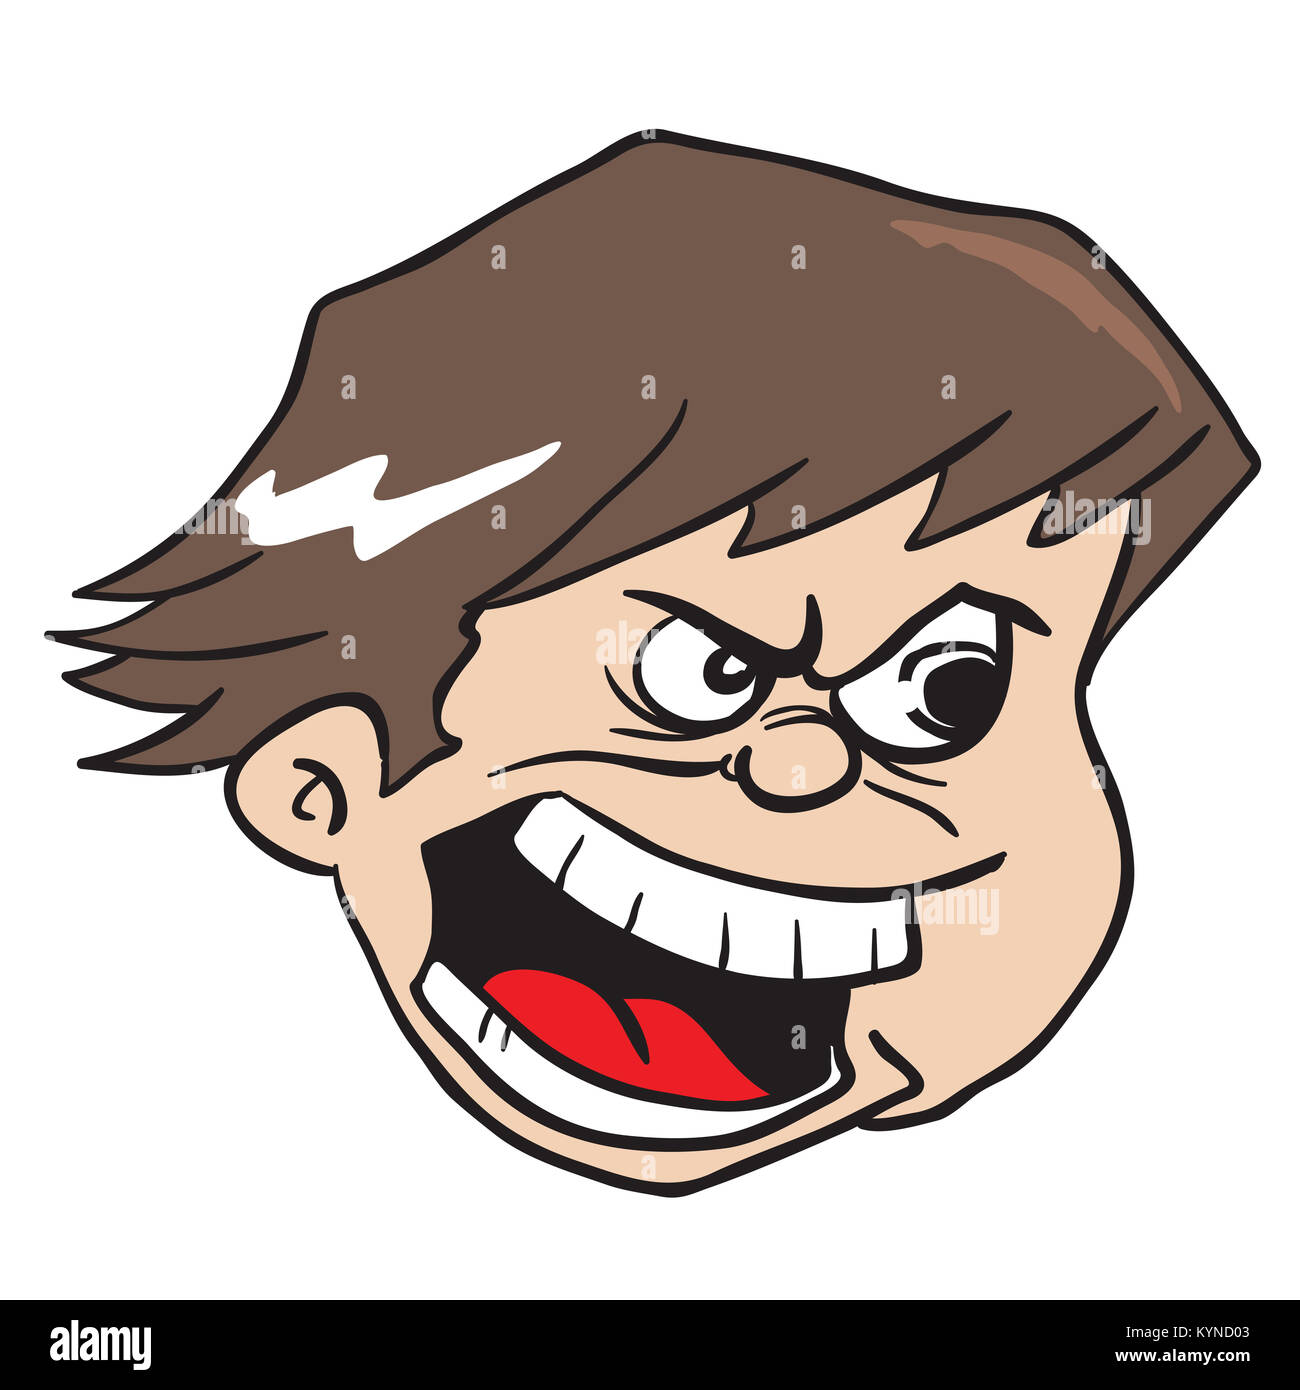 Angry boy cartoon illustration isolé sur fond blanc Banque D'Images